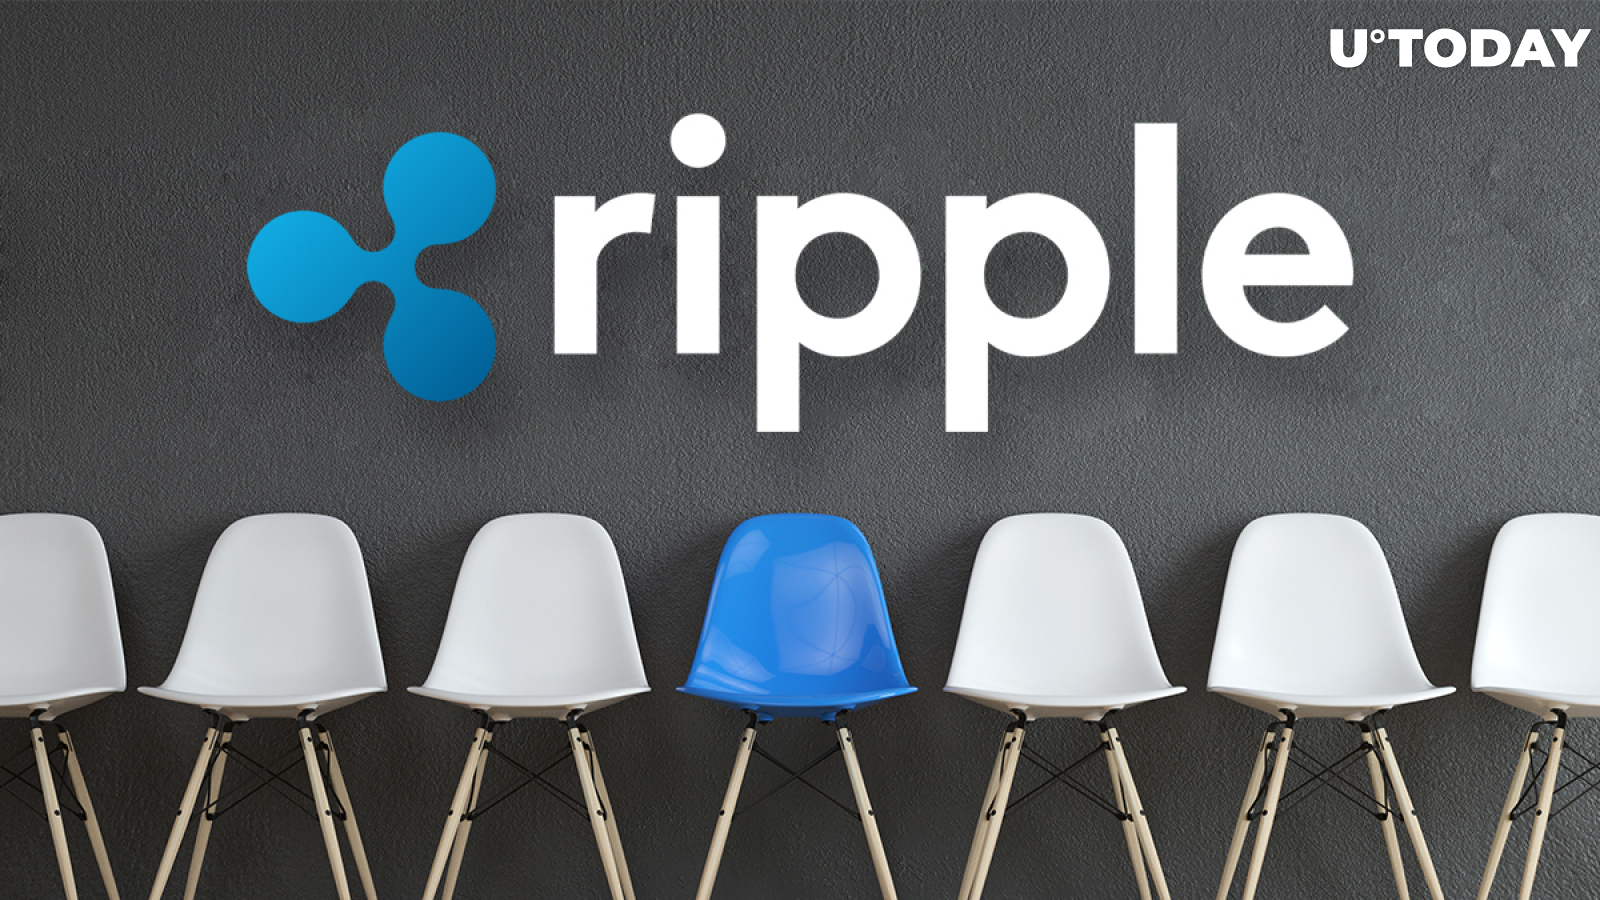 Ripple Job Offer Hints the Company May Start Building Distributed Trading Platform